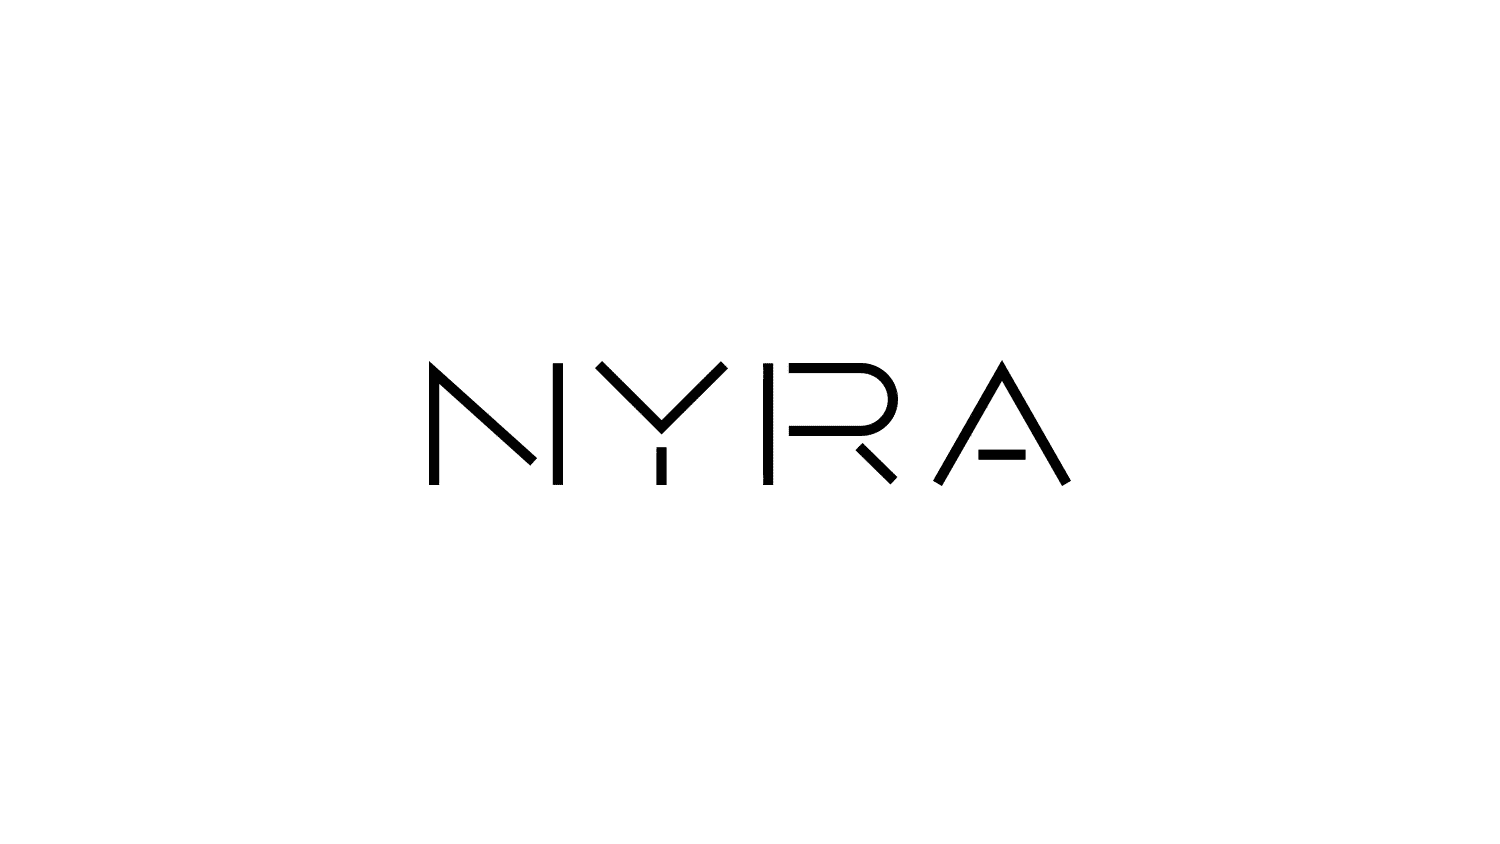 Moving letters of the word NYRA forming different shapes from a square stack of NY over RA to a shape similar to stairs with NR on the first level and RA on the second level